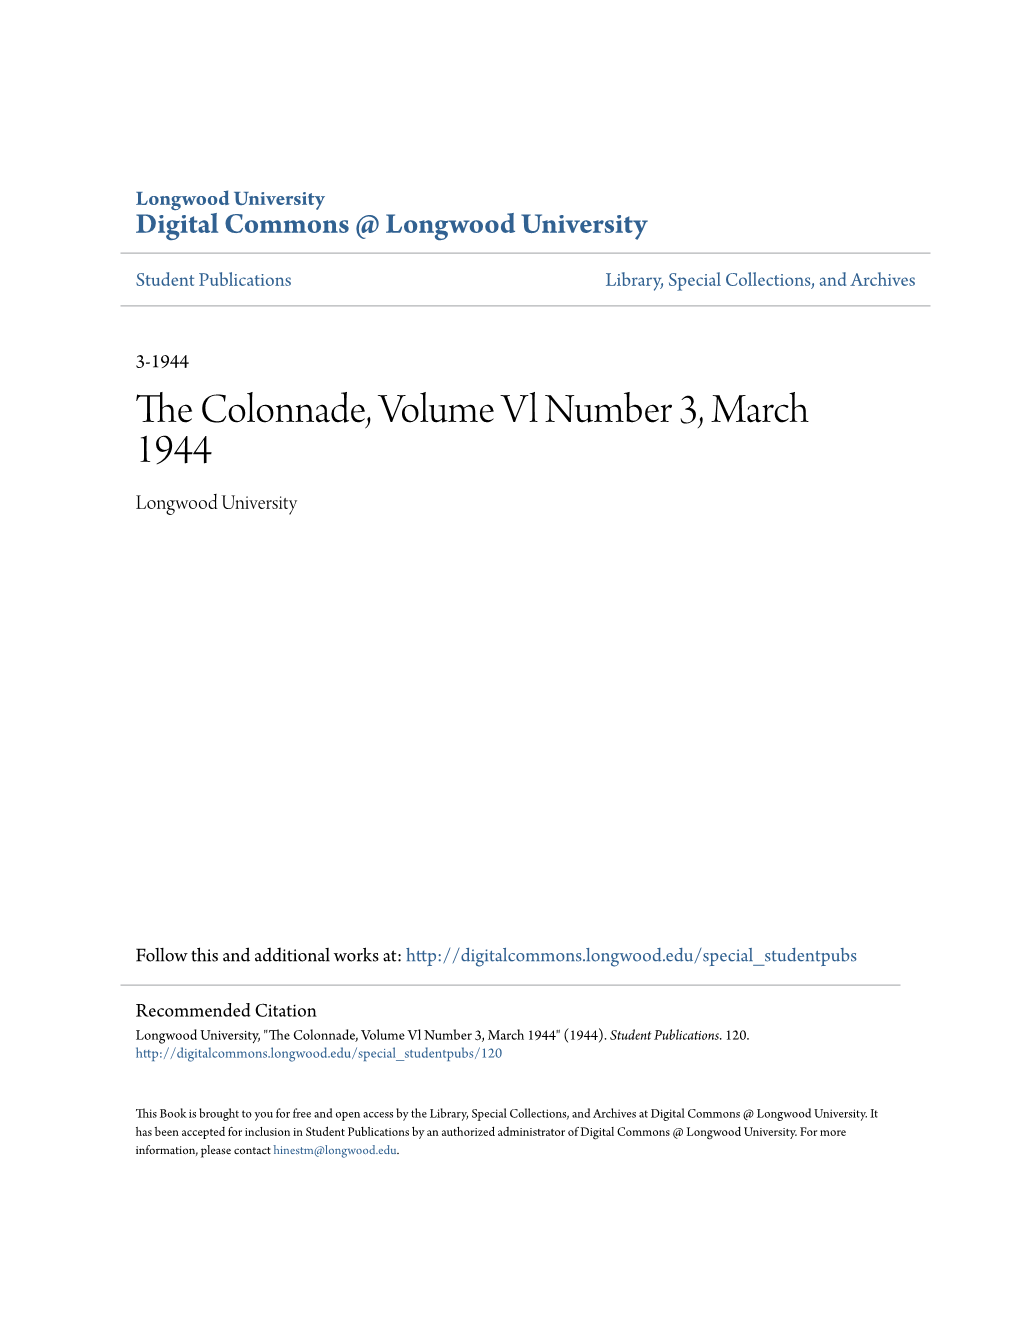 The Colonnade, Volume Vl Number 3, March 1944